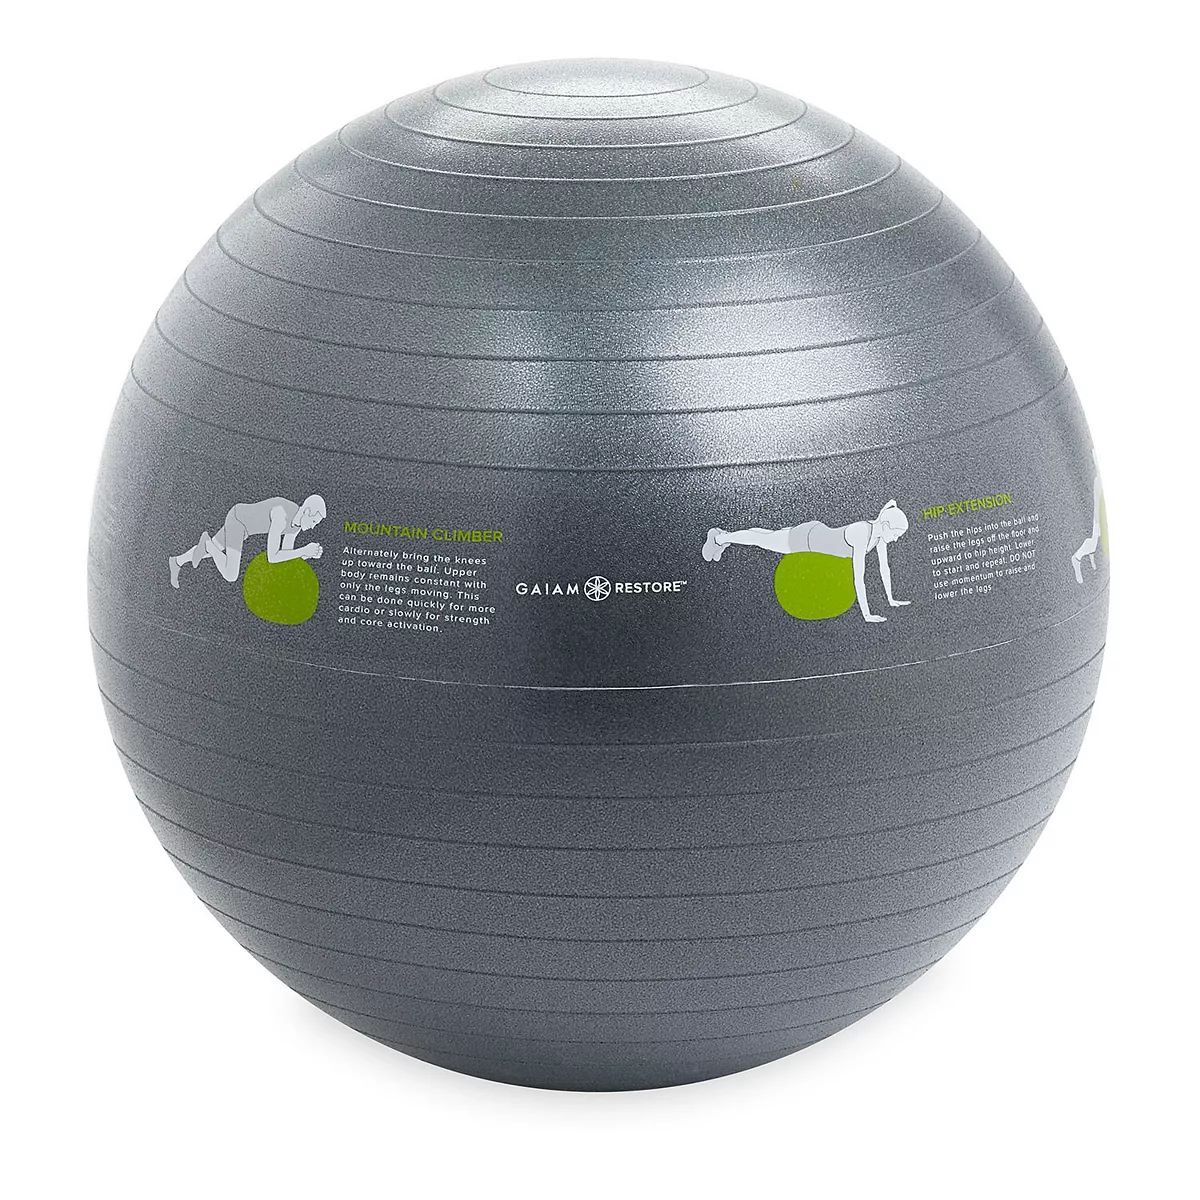 Gaiam Restore Self-Guided Stability Ball | Kohl's